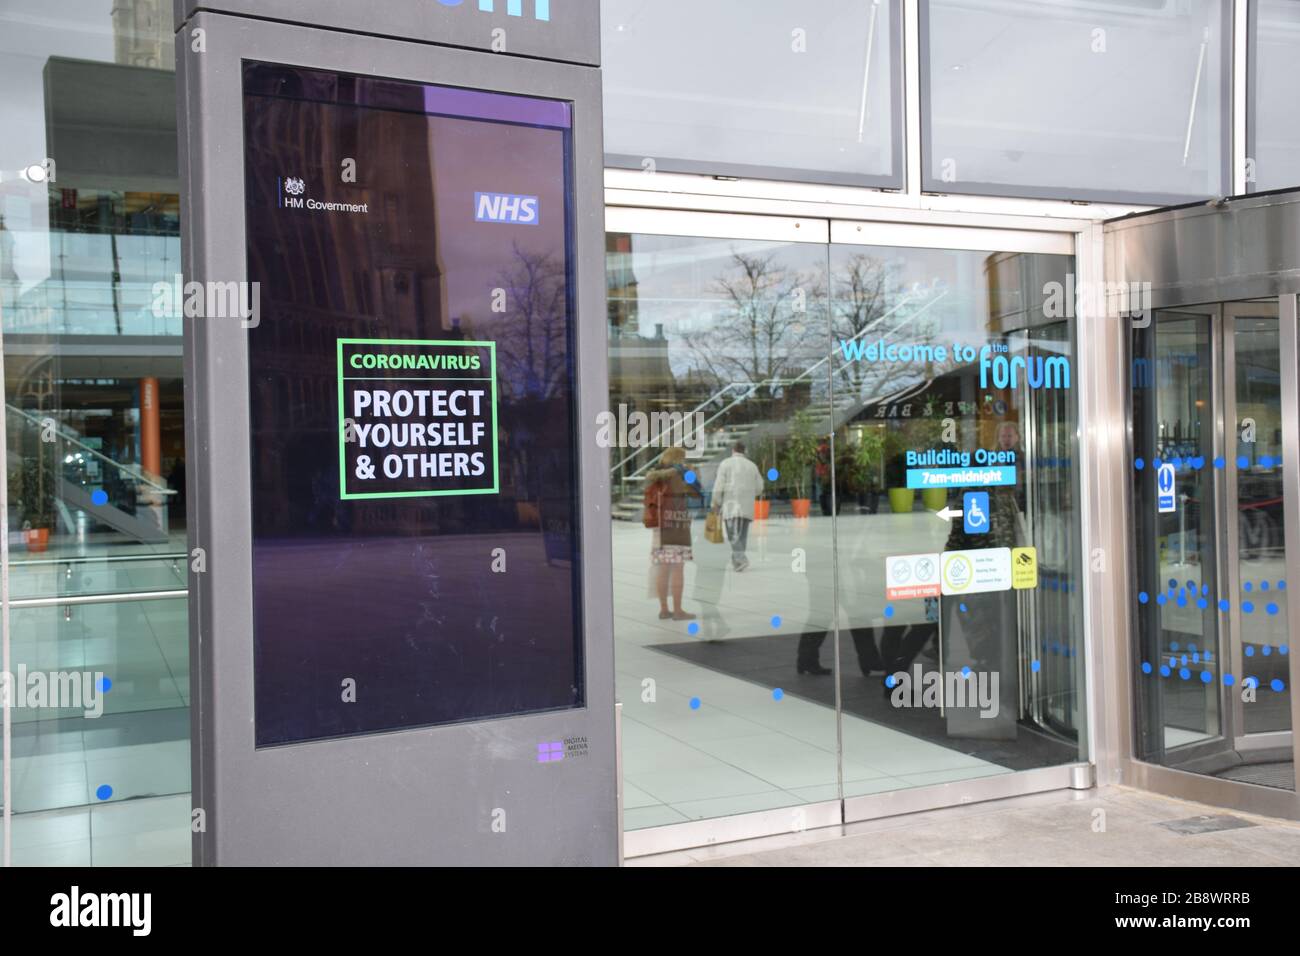 Coronavirus warning information at entrance to The Forum, Norwich UK March 2020 Stock Photo